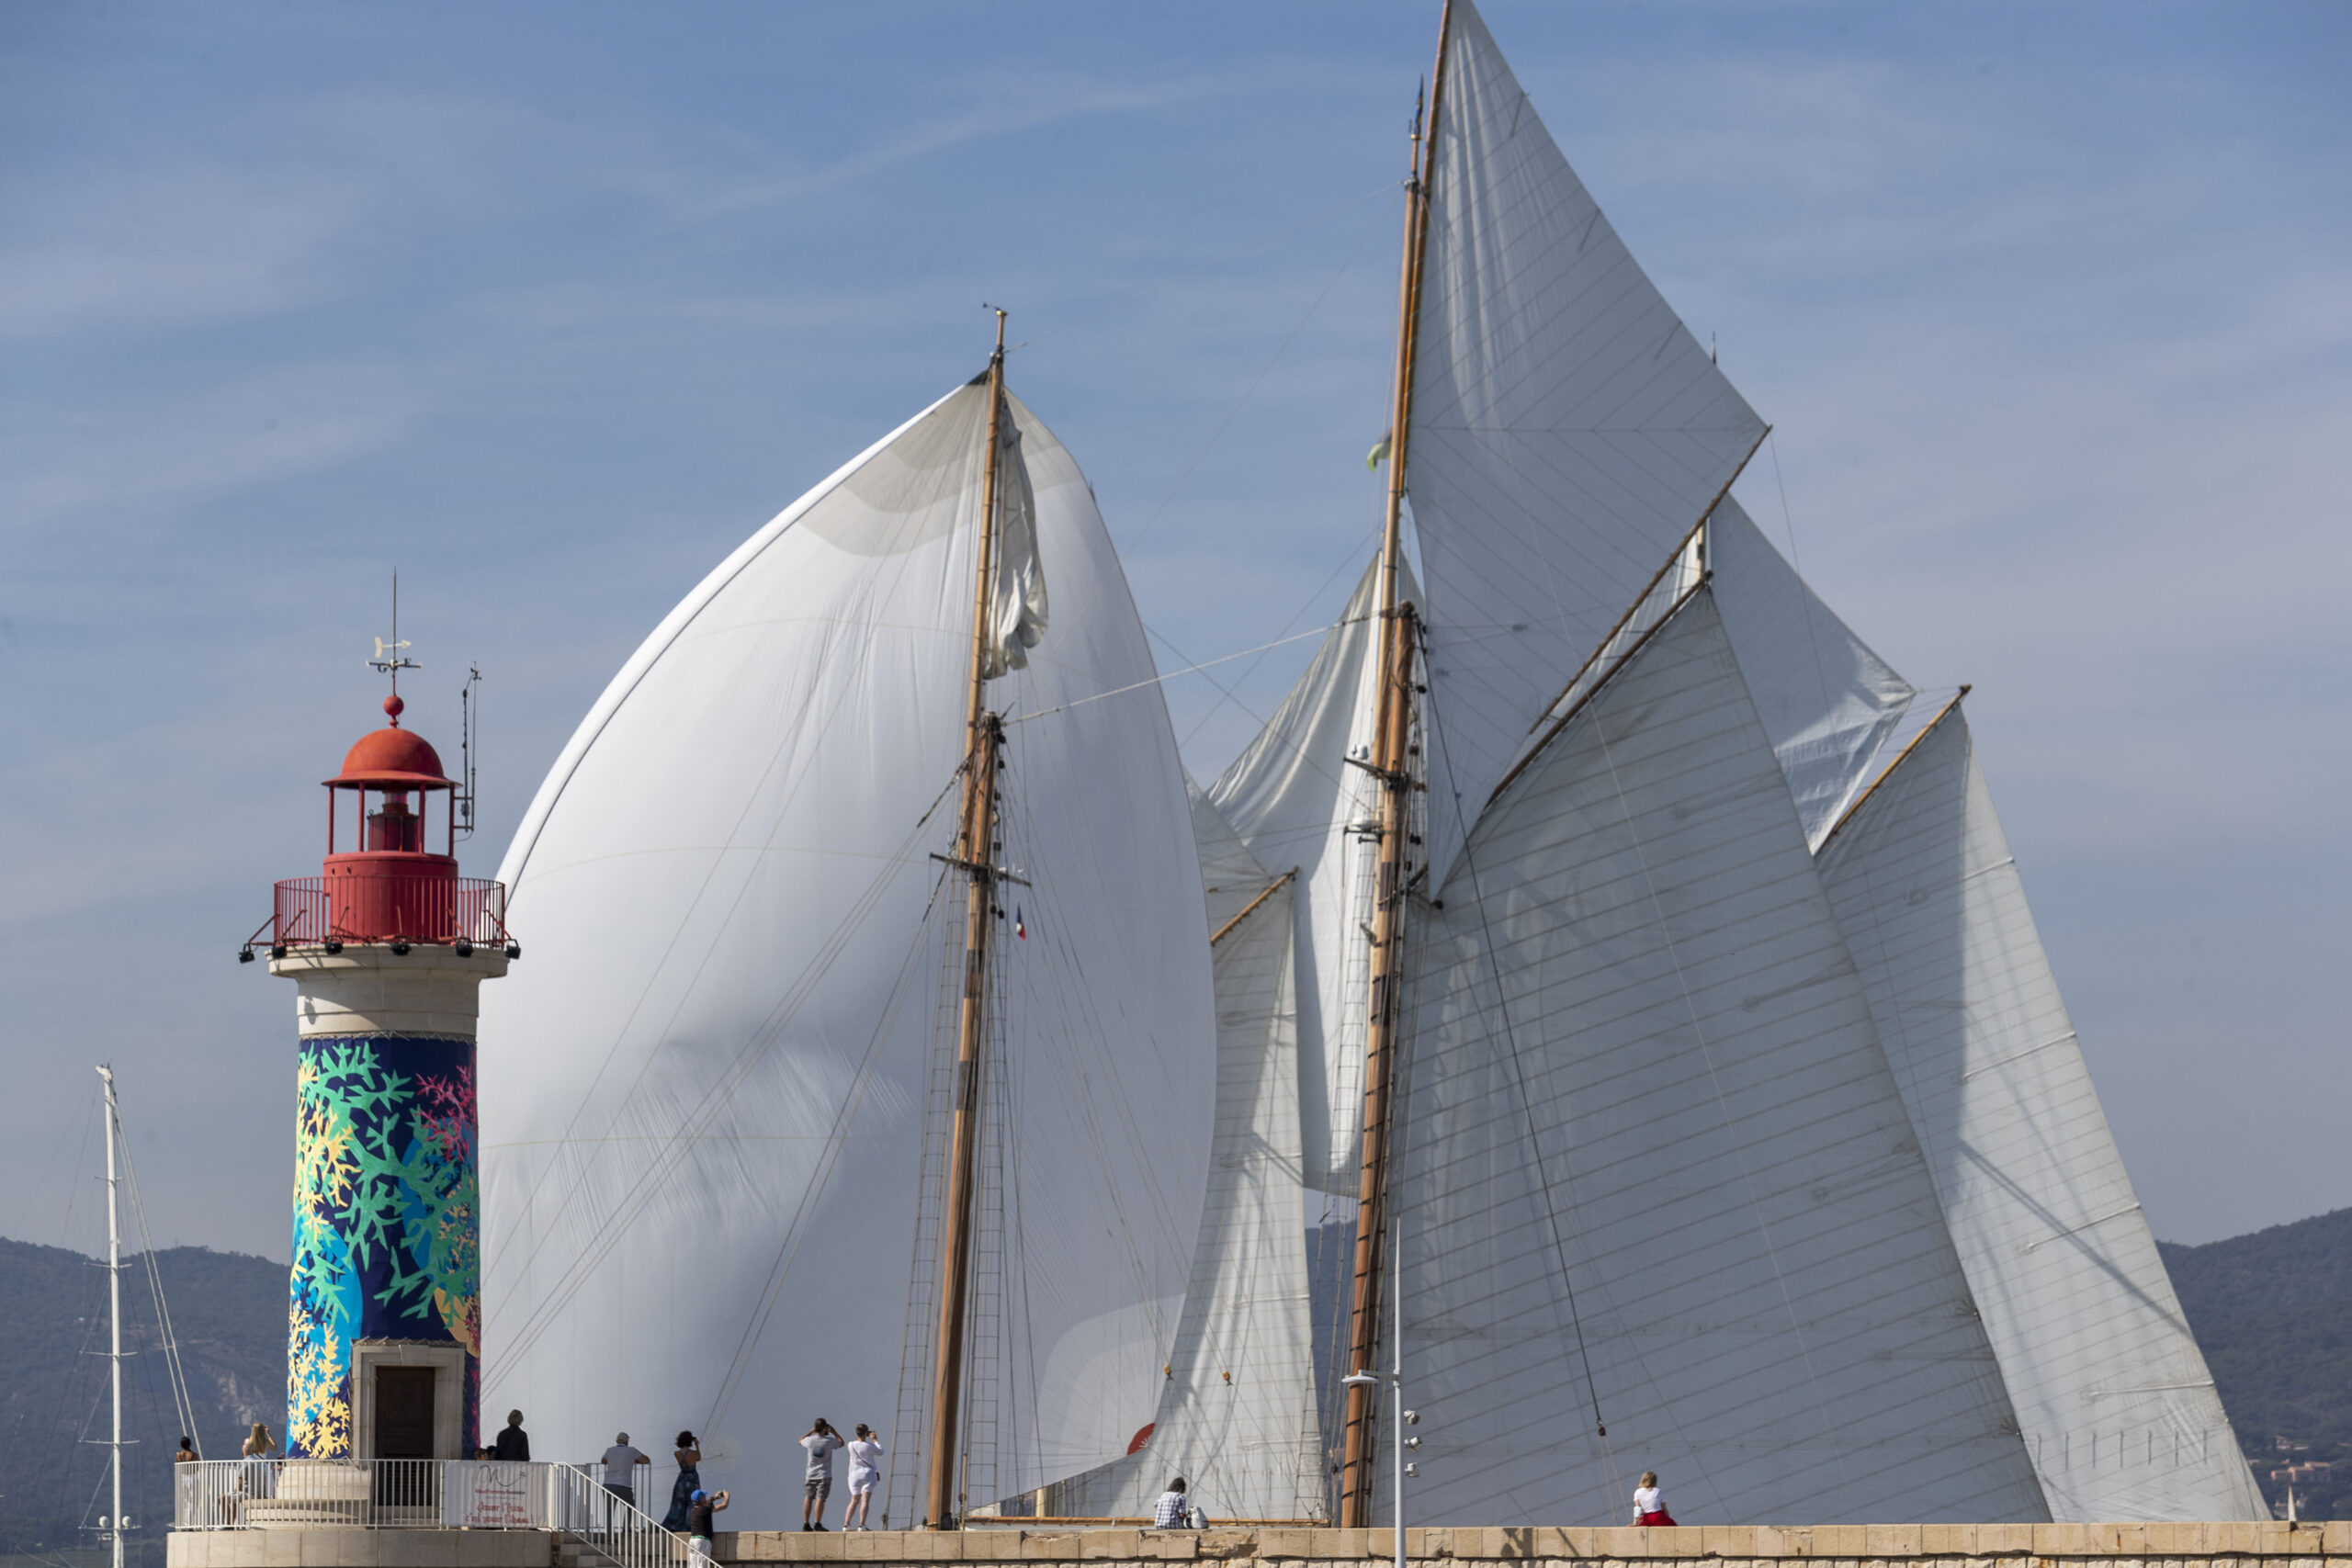 New courses, safety and owners at the helm:  Les Voiles vibes in Saint Tropez!